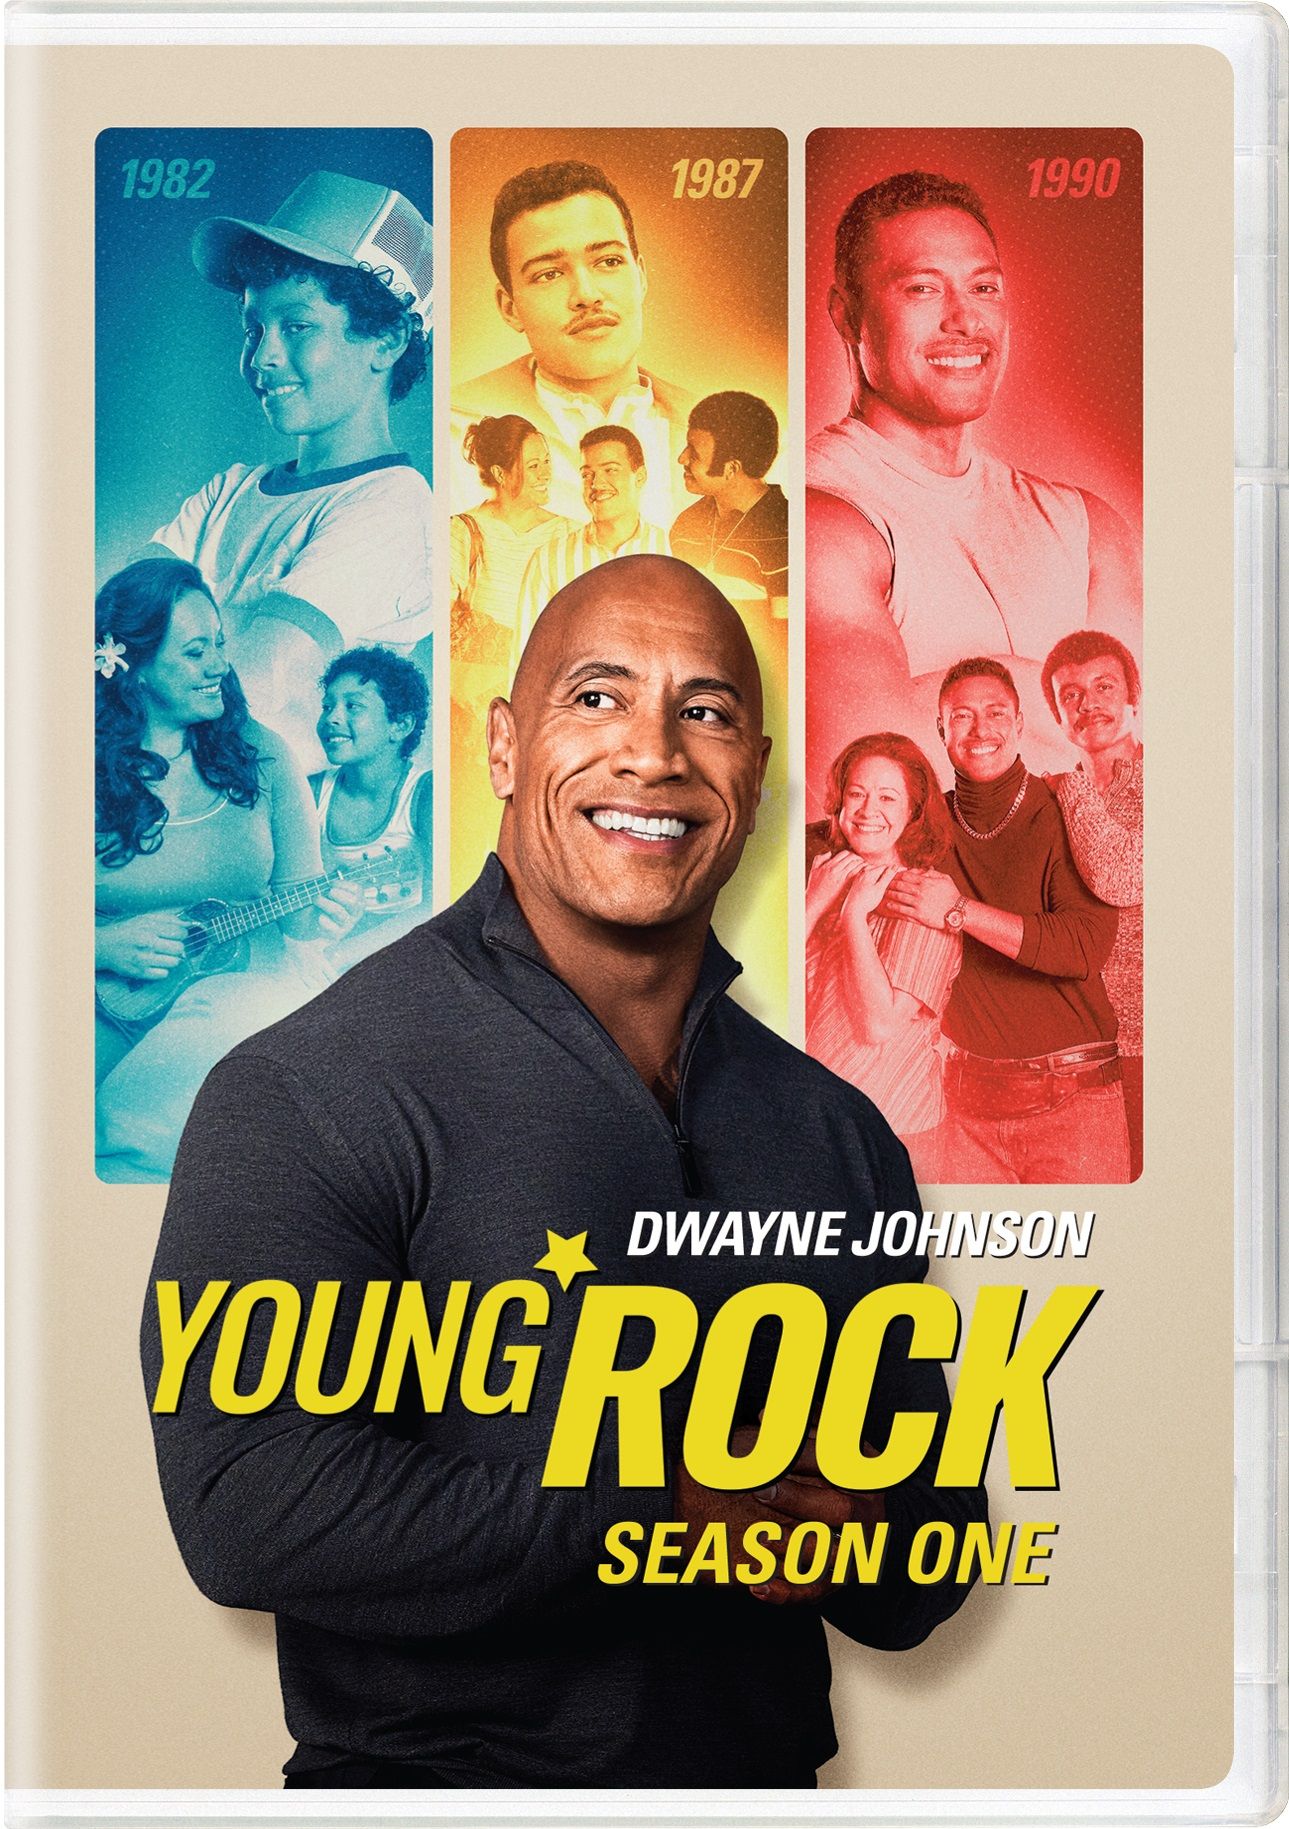 Young Rock: Season One - DVD [ 2021 ]  - Comedy Television On DVD - TV Shows On GRUV